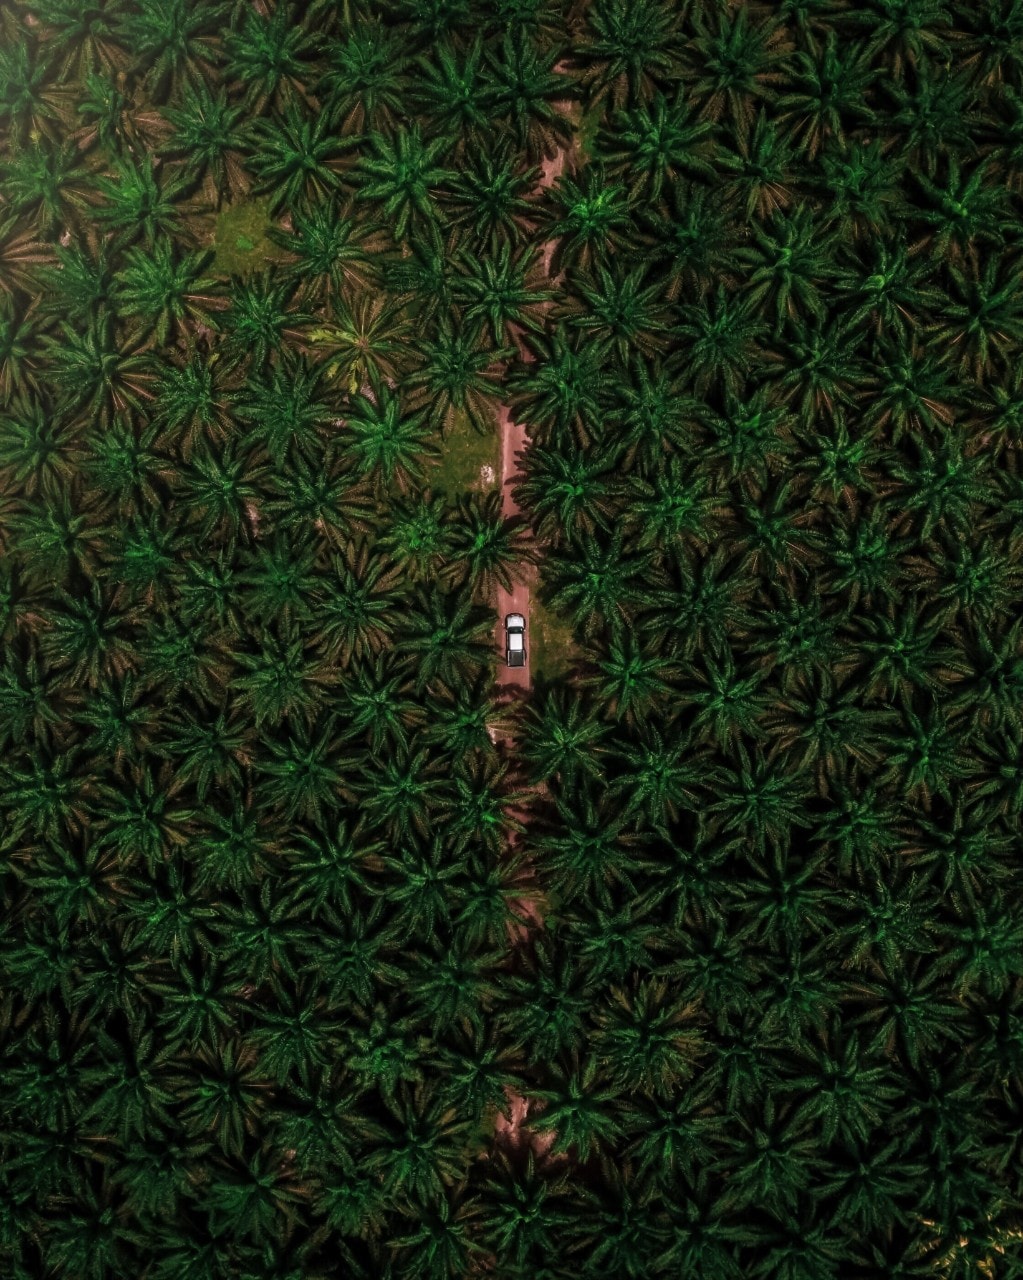 Aerial view of oil palm plantation